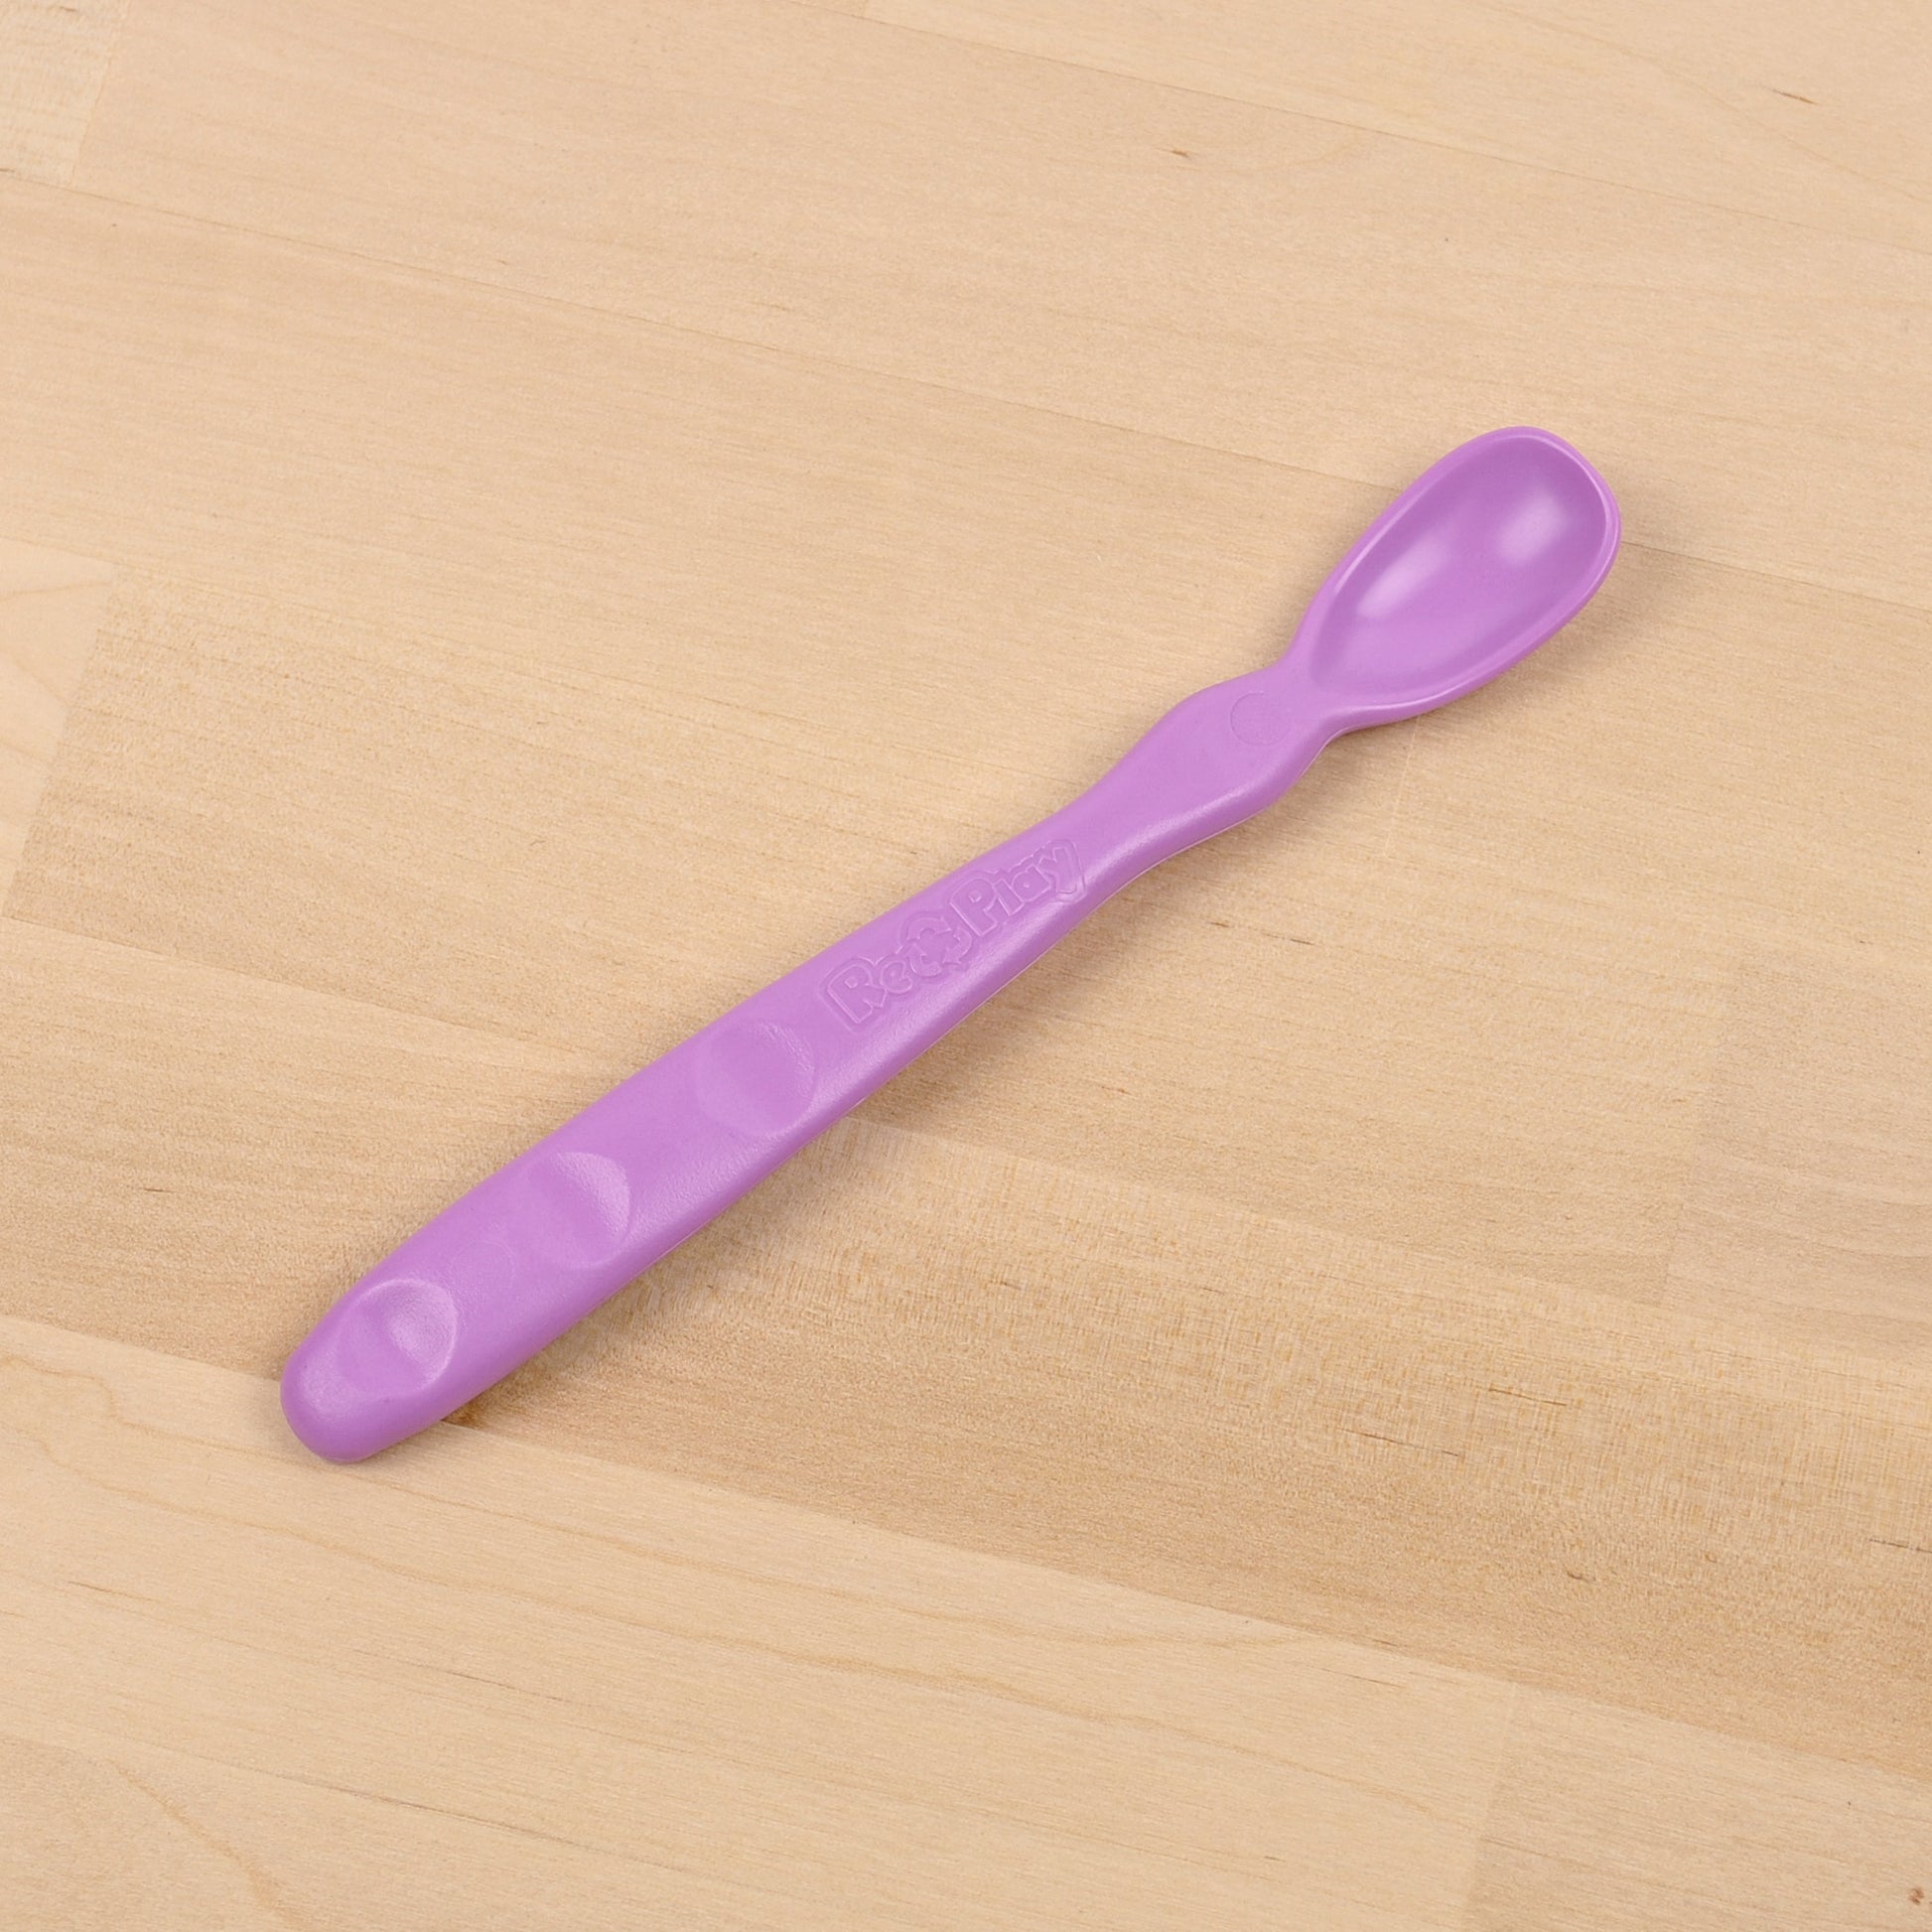 Re-Play Infant Spoon in Purple from Bear & Moo